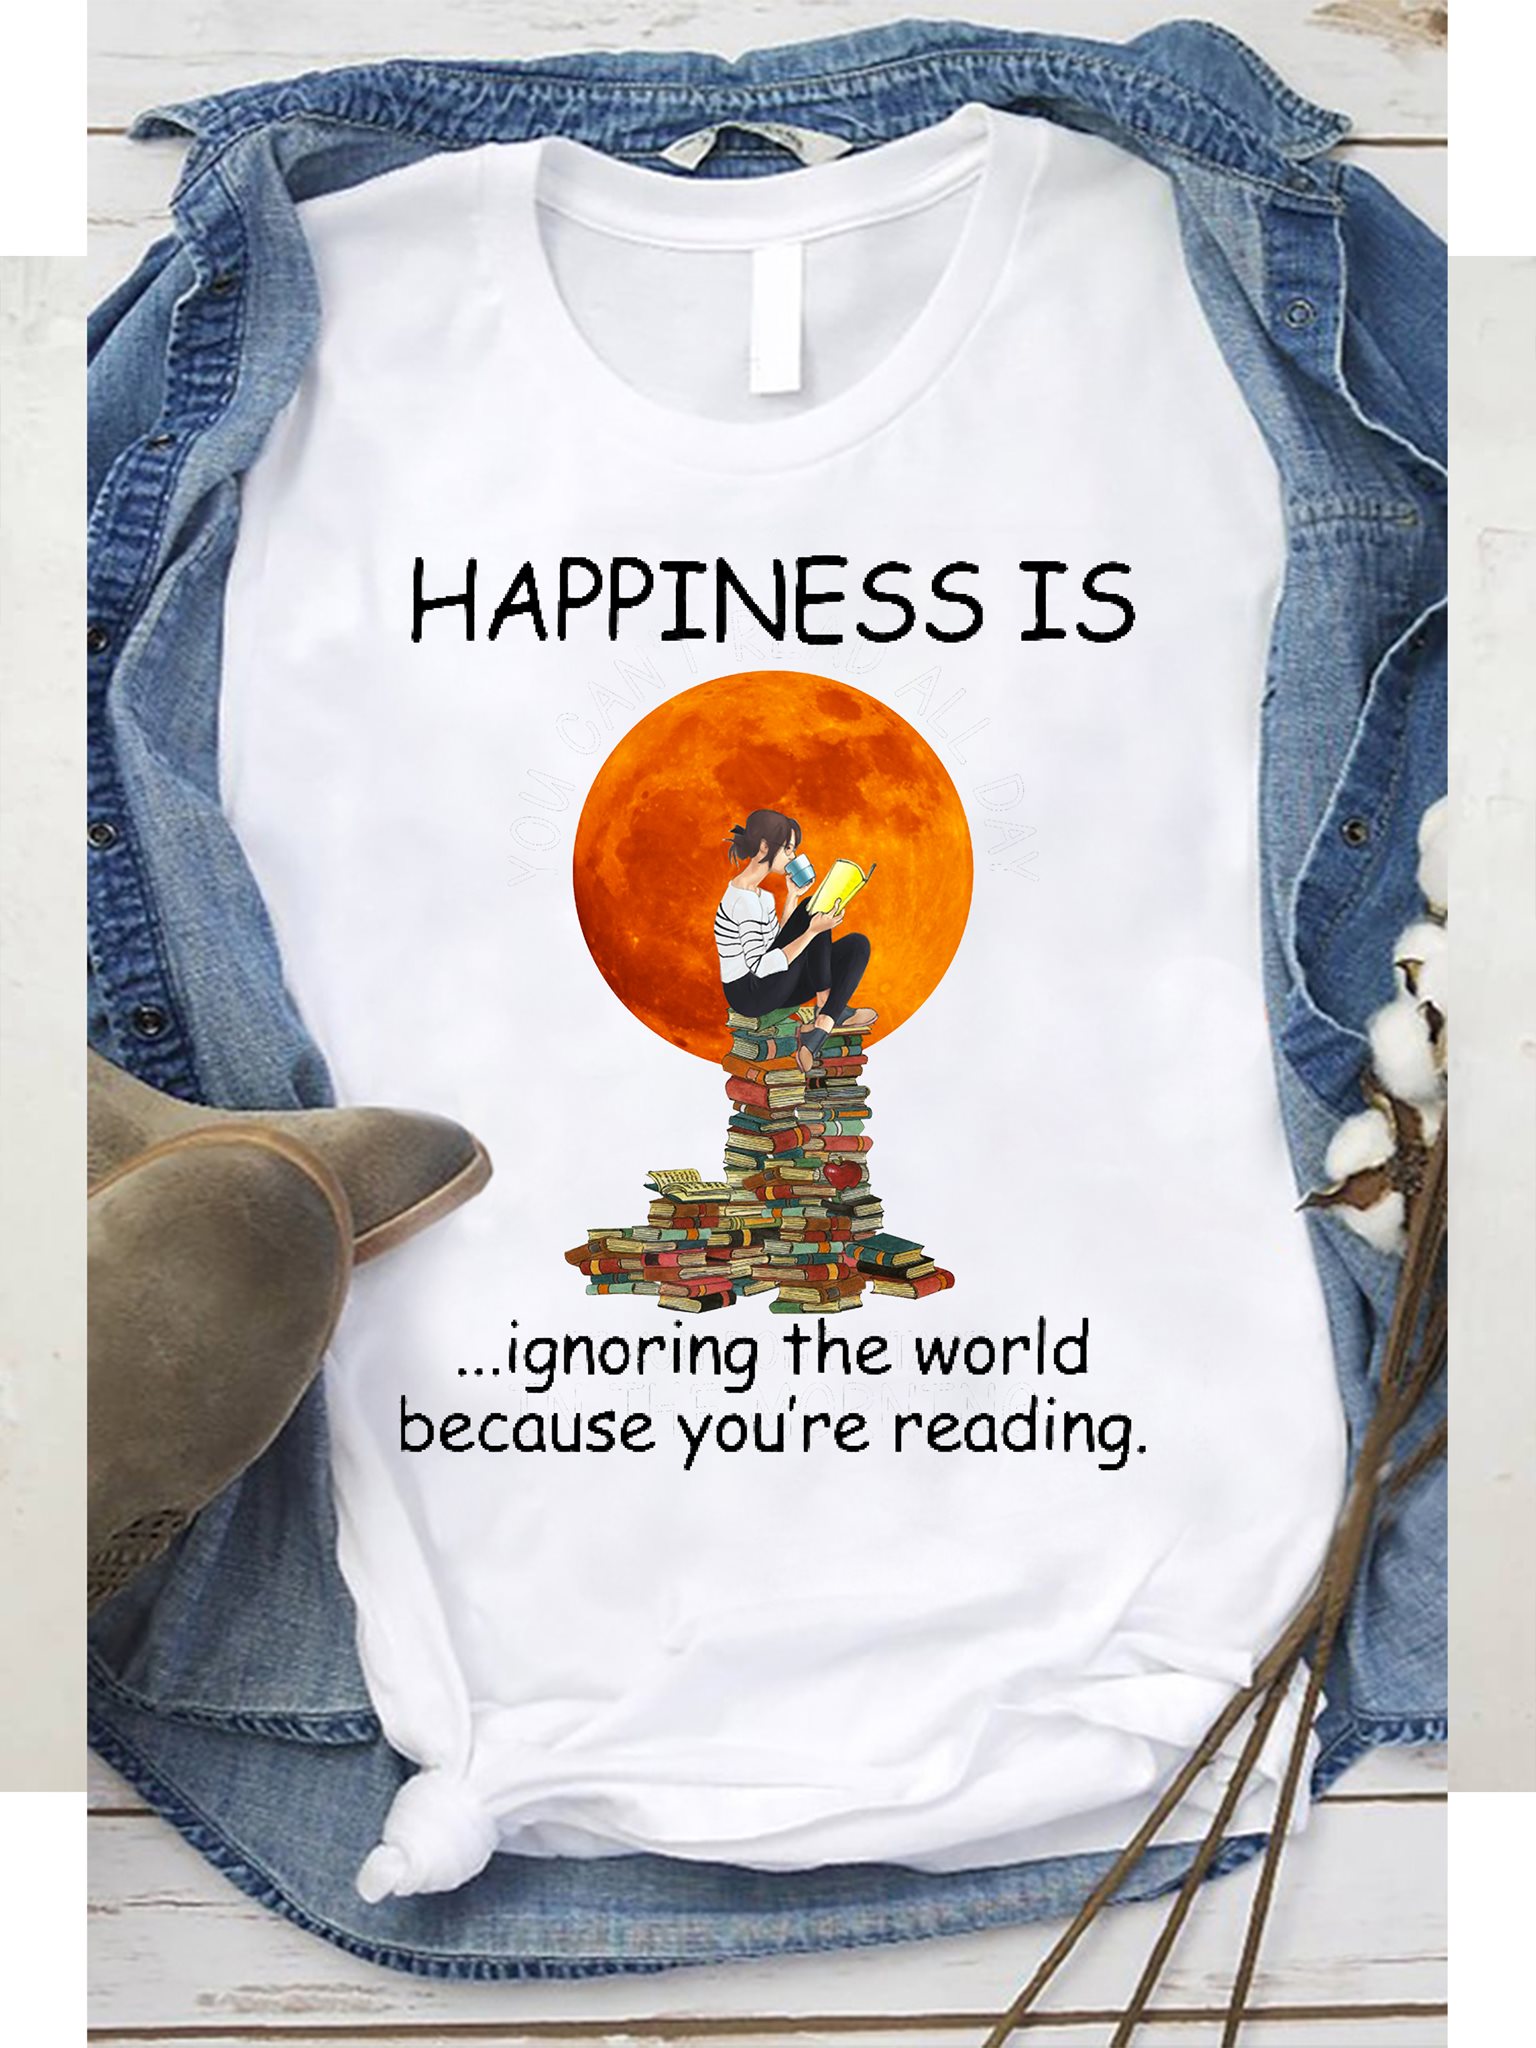 Happiness is ignoring the world because you're reading